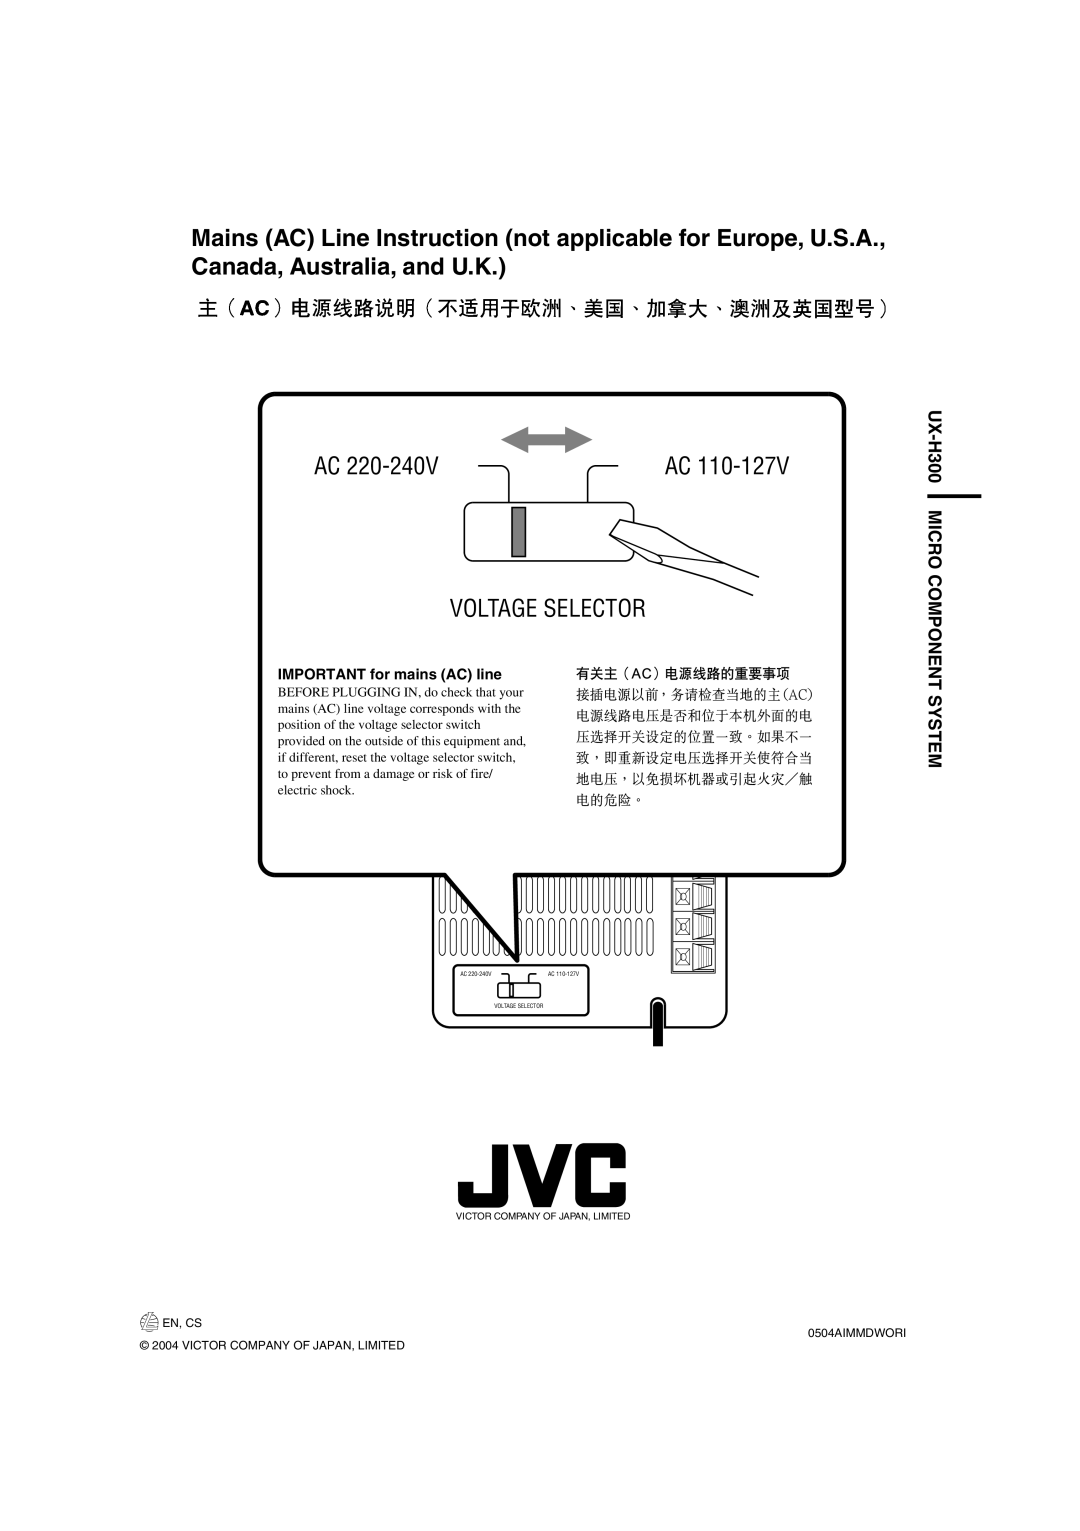 JVC manual Voltage Selector, UX-H300MICRO COMPONENT SYSTEM, IMPORTANT for mains AC line 